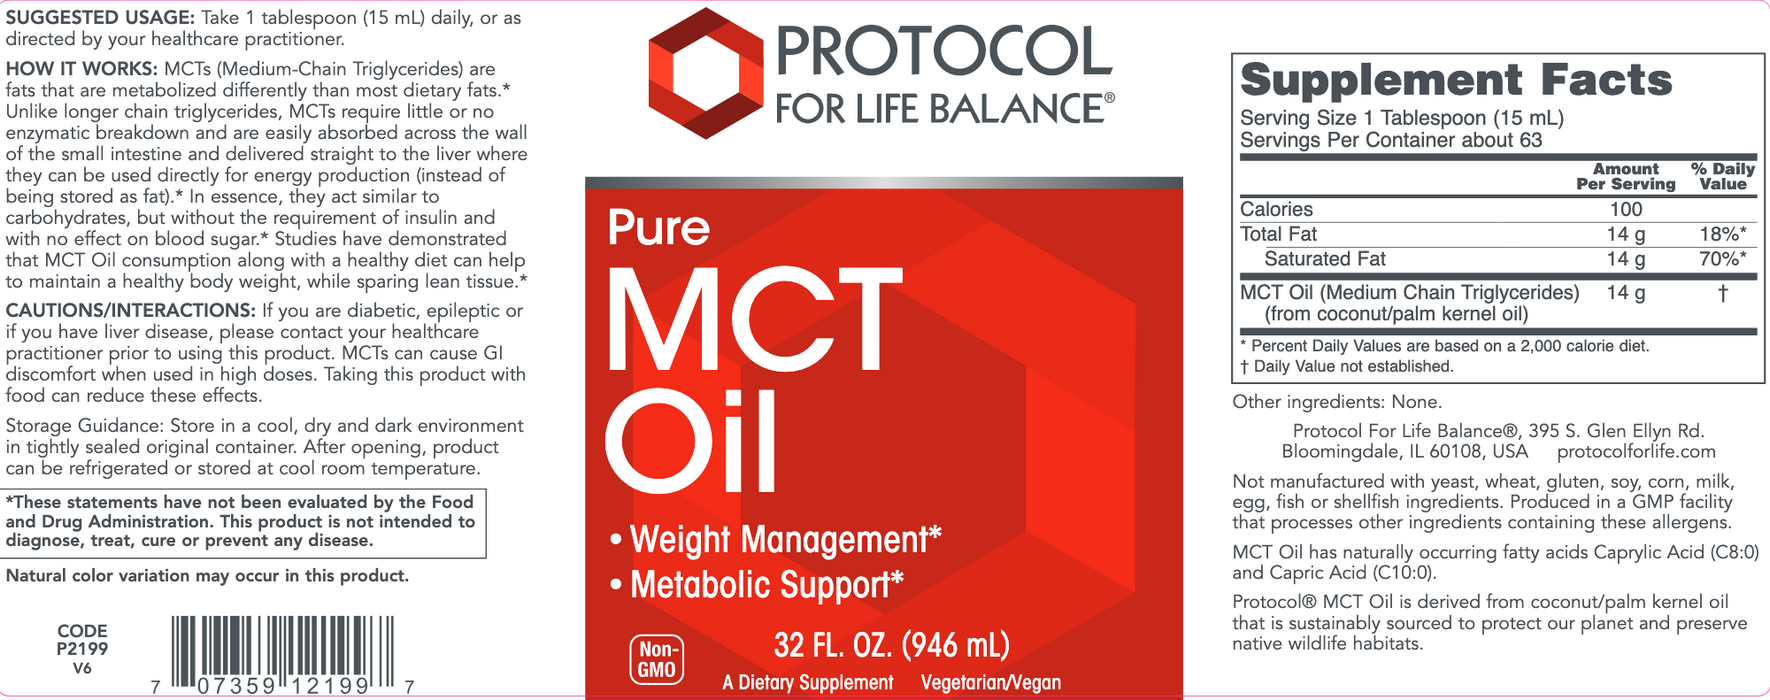 MCT Oil-Vitamins & Supplements-Protocol For Life Balance-16 Fluid Ounces-Pine Street Clinic